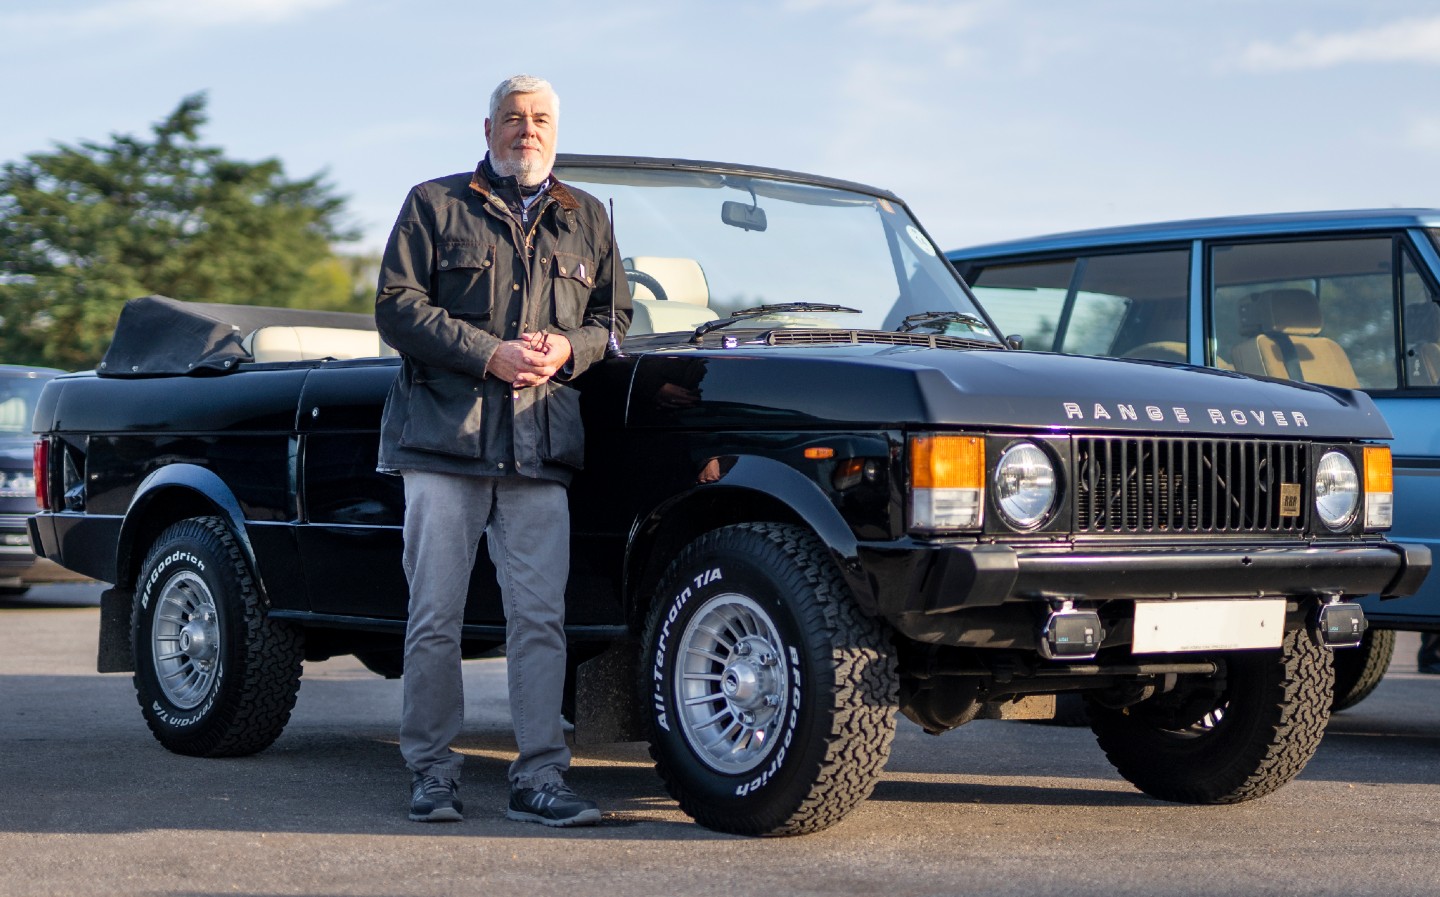 Range Rover at 50: From a Royal Rangie to one bought by a member of Queen, meet the star cars and their owners - David Barker and Roger Taylor's convertible Range Rover